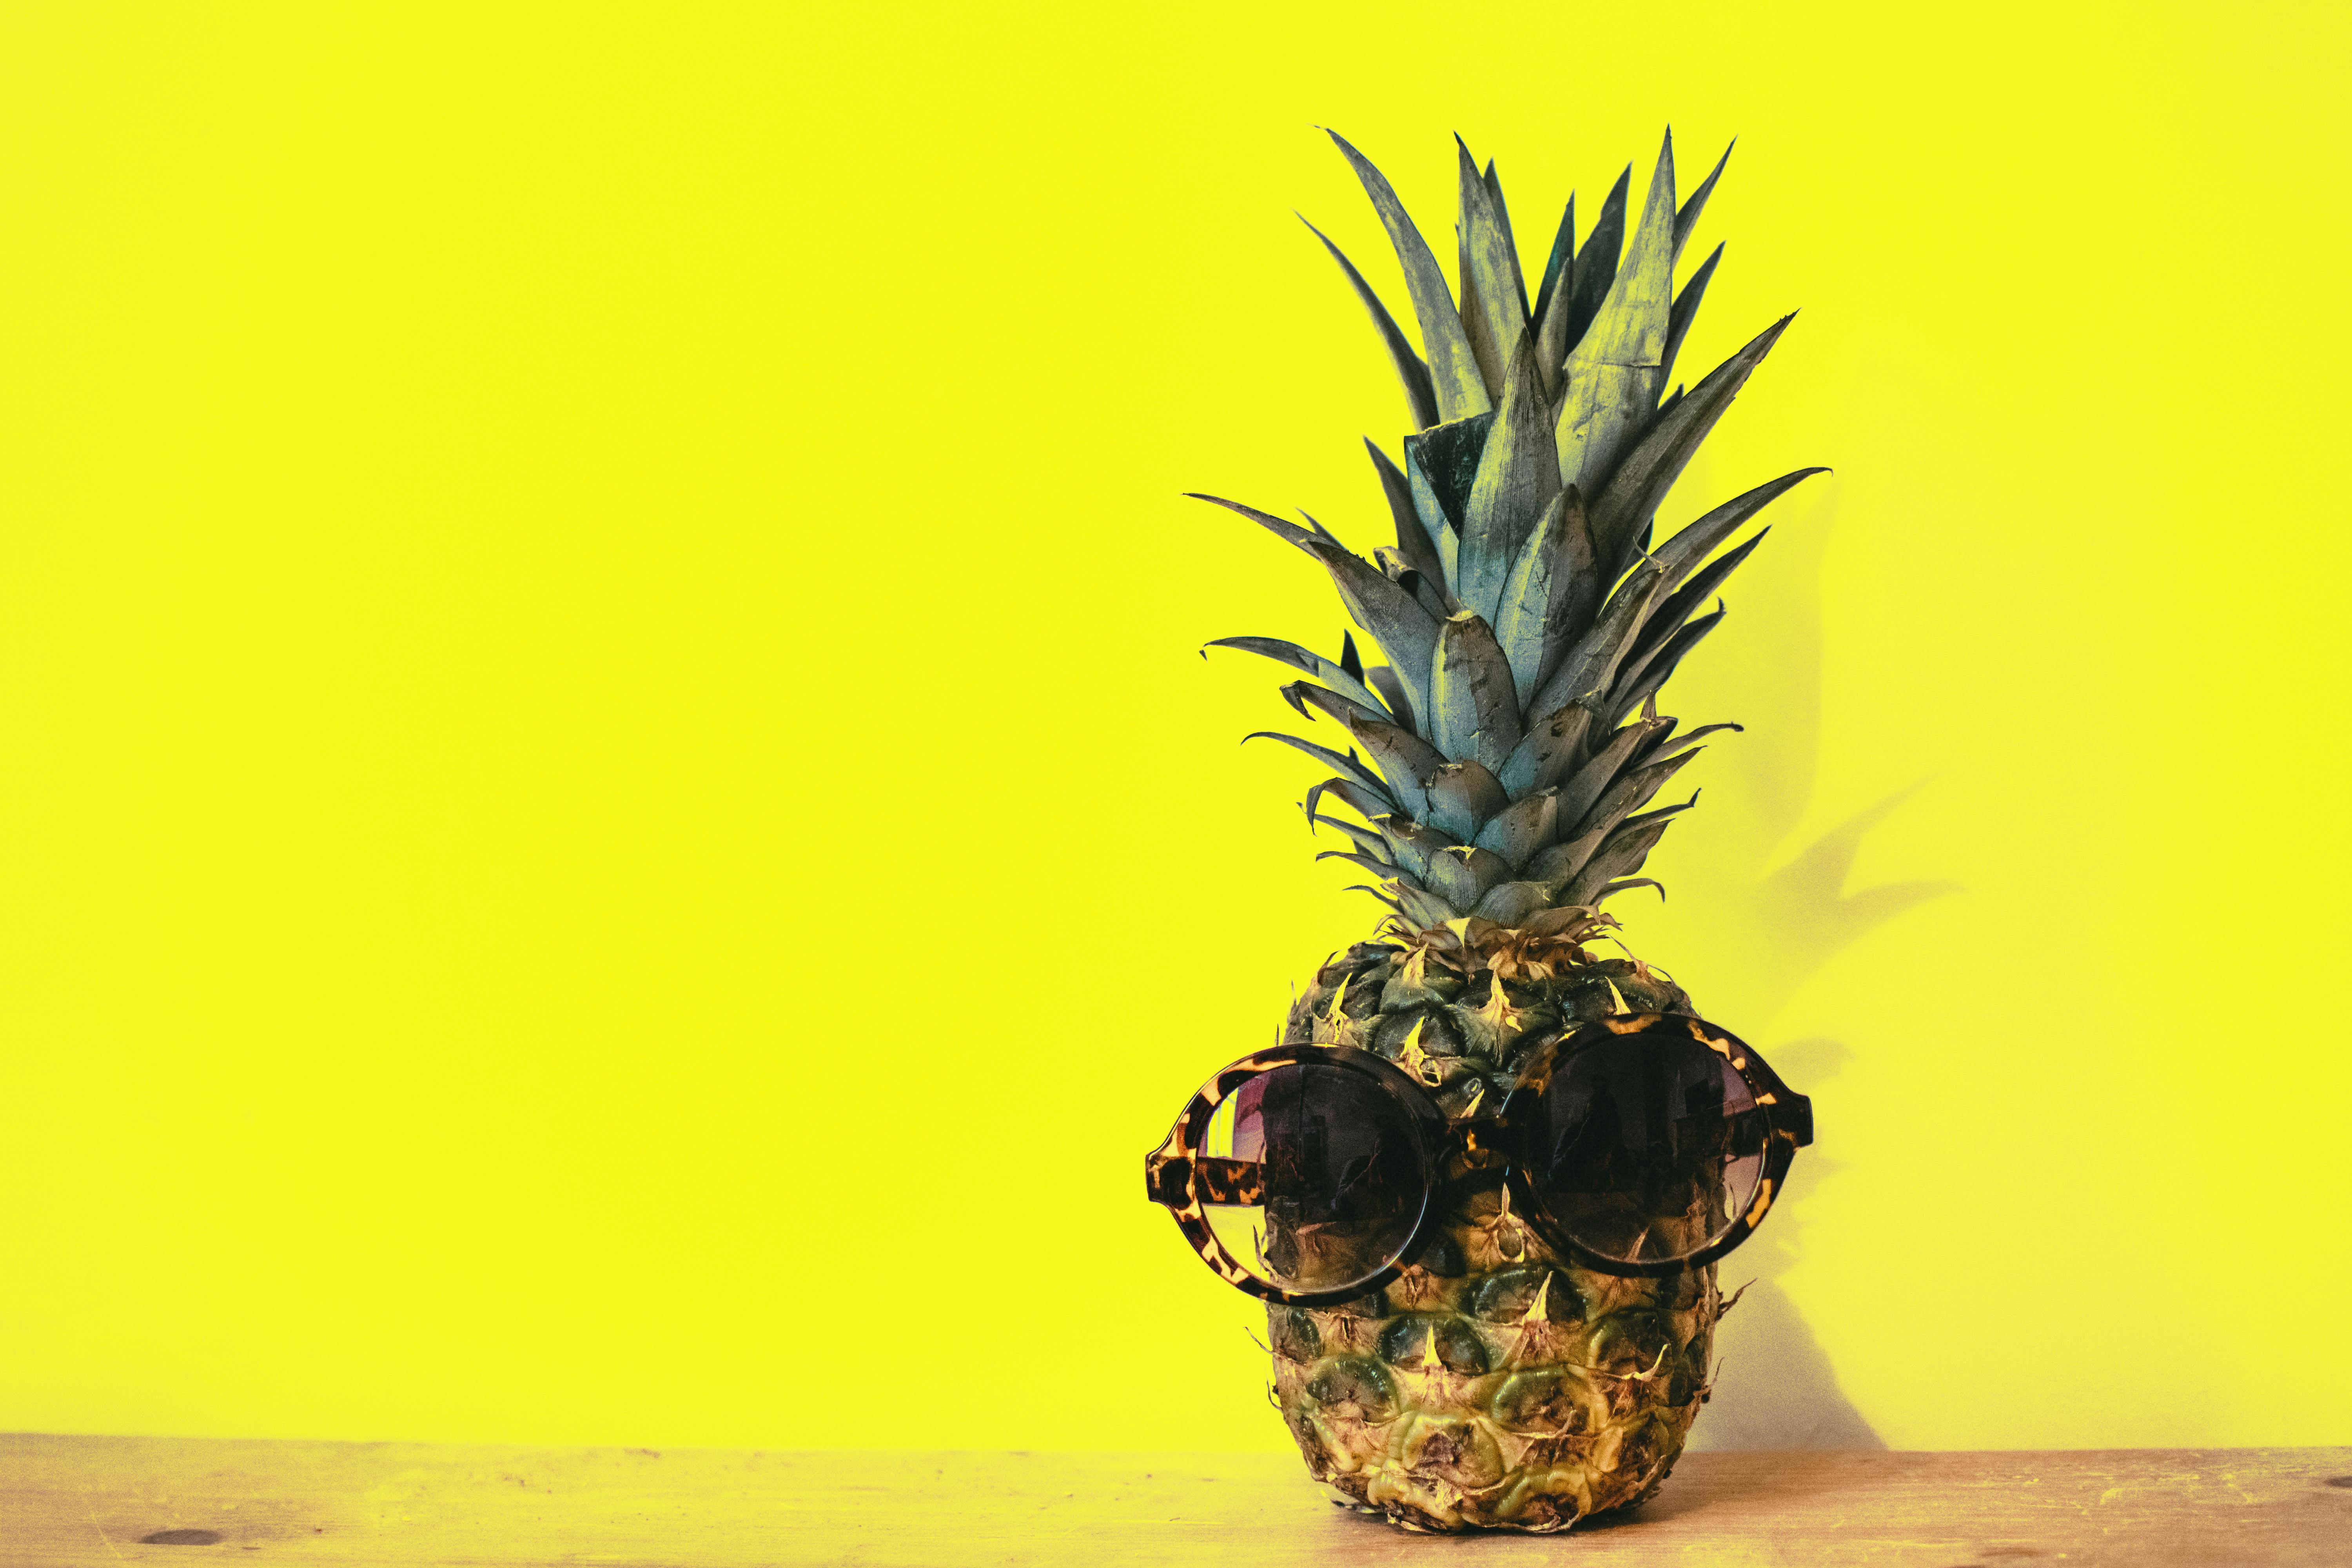 Blue Pineapple On Yellow Background Stock Photo - Download Image